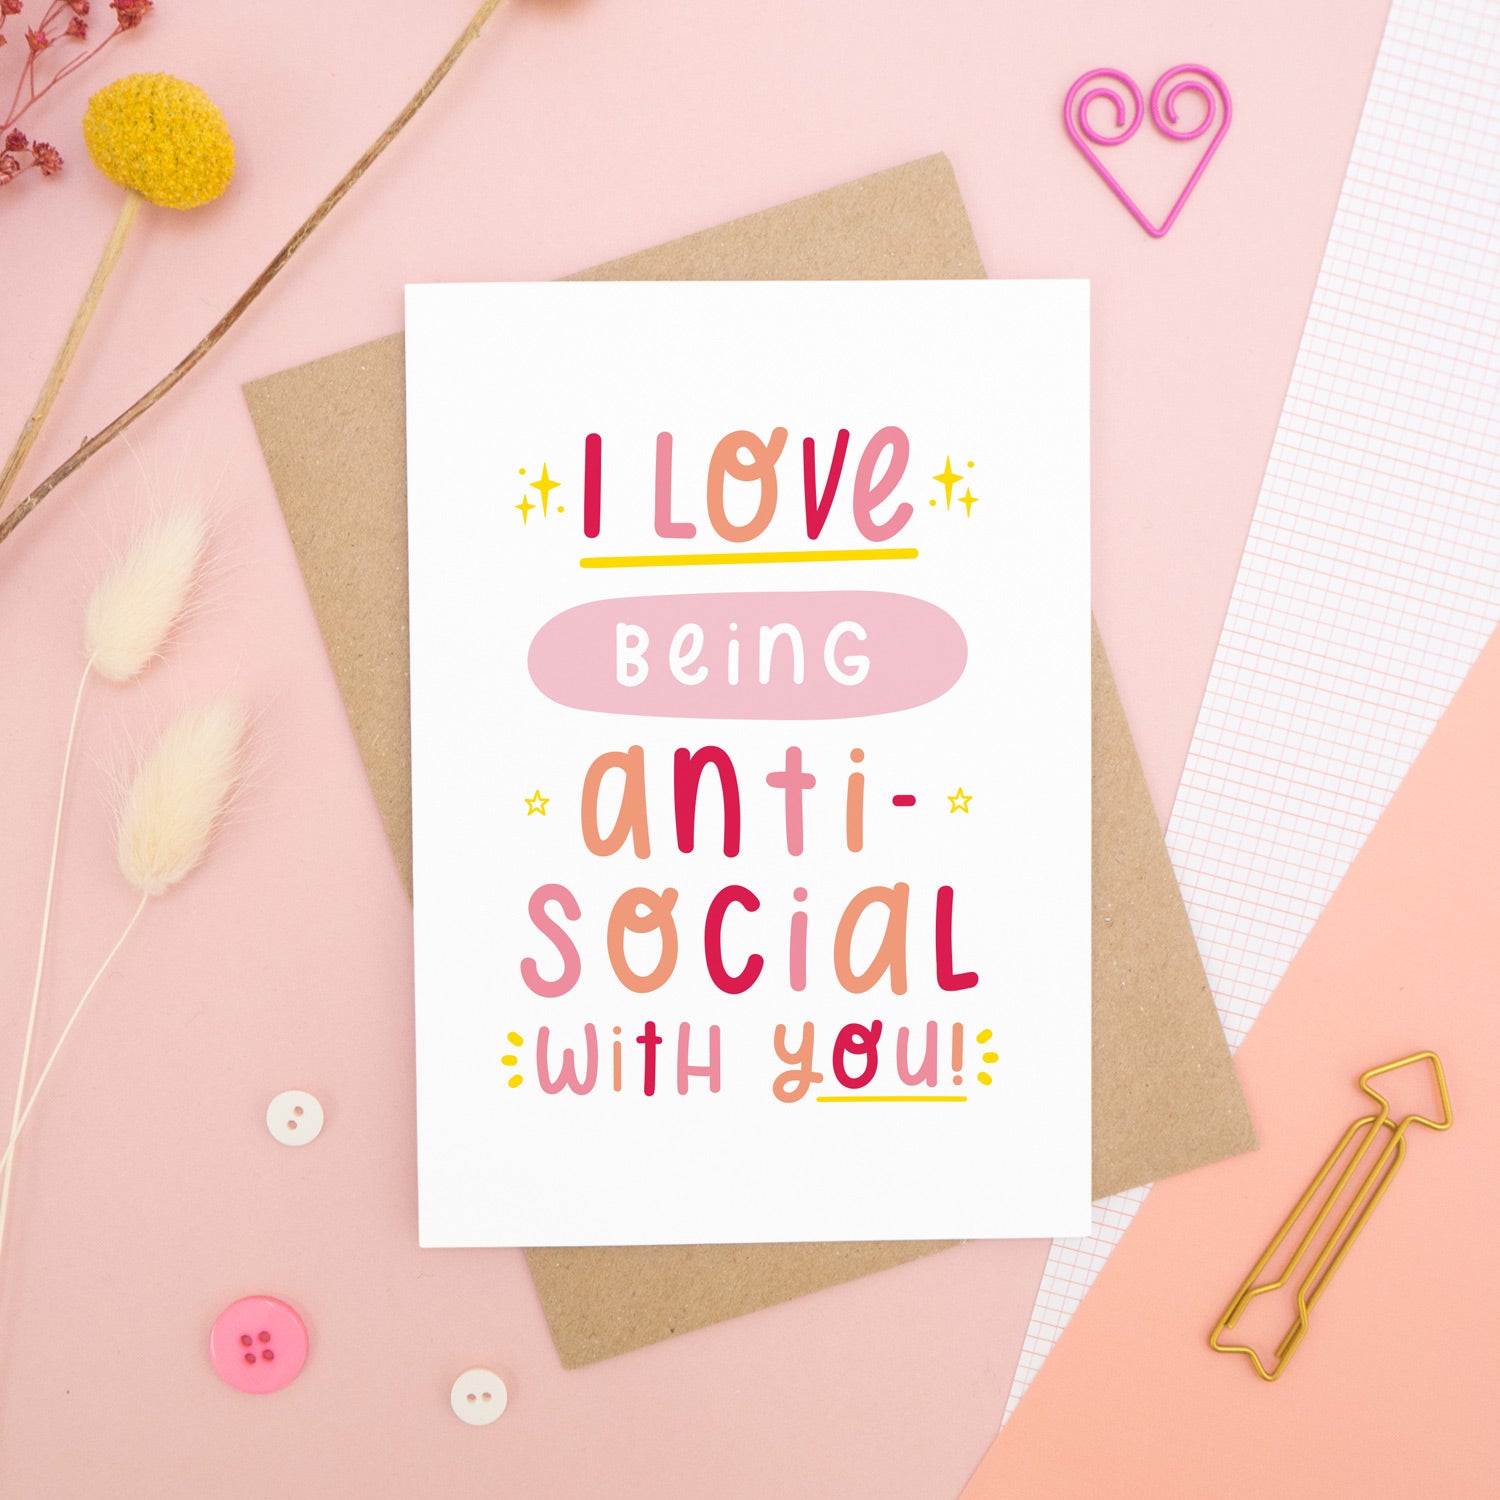 The 'I love being anti-social with you' card photographed on a pink background with dried flowers, buttons and paper clips as props.